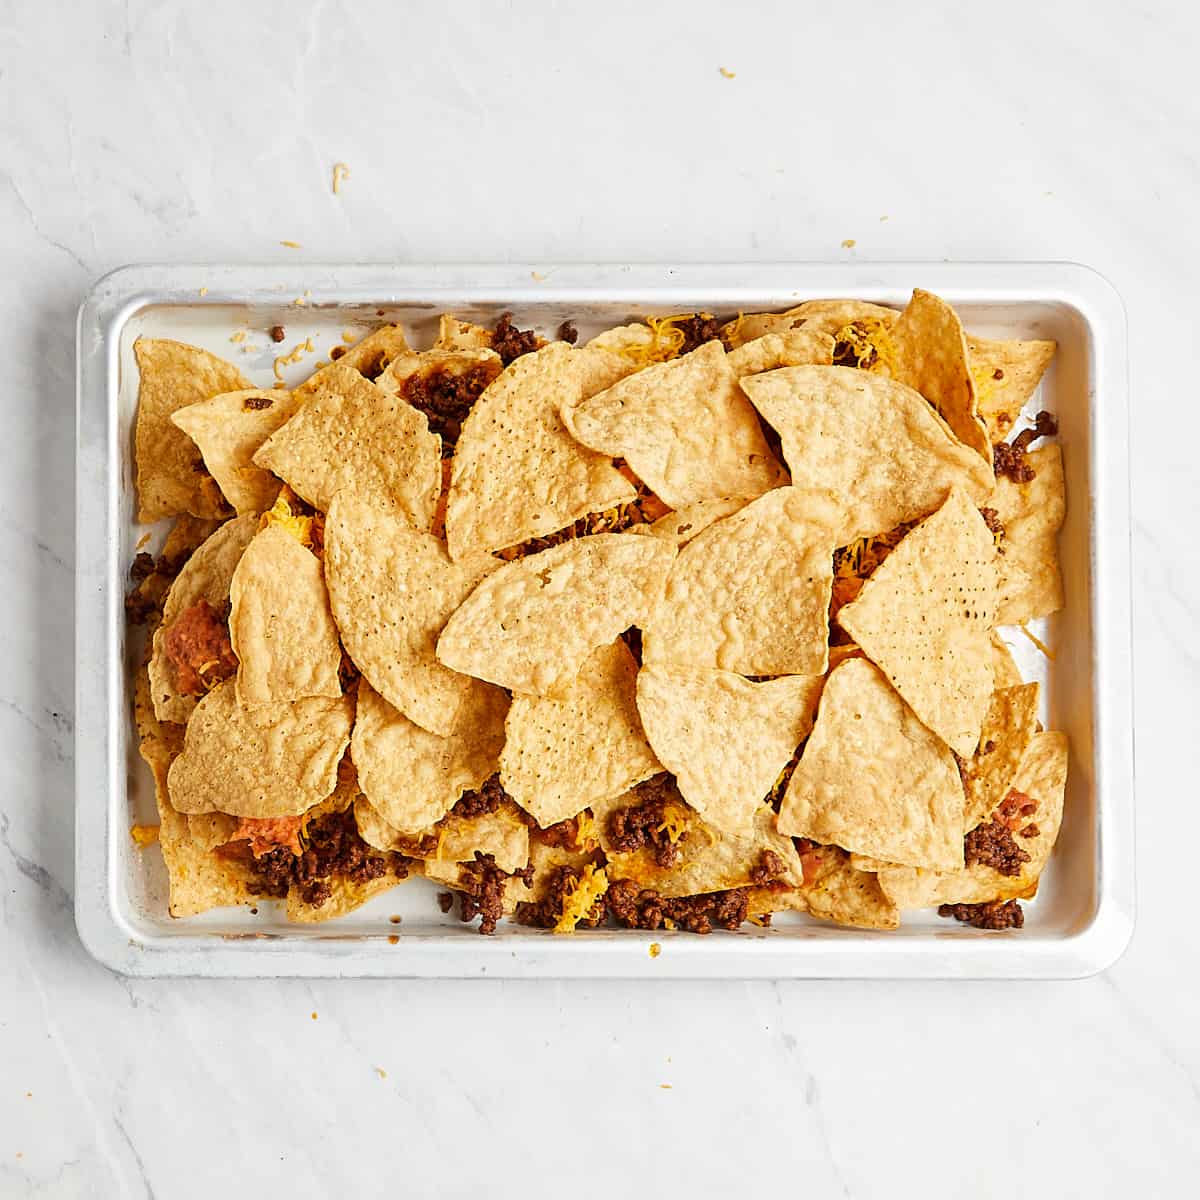 layers of tortilla chips, beans, cheese, and ground beef in a sheet pan